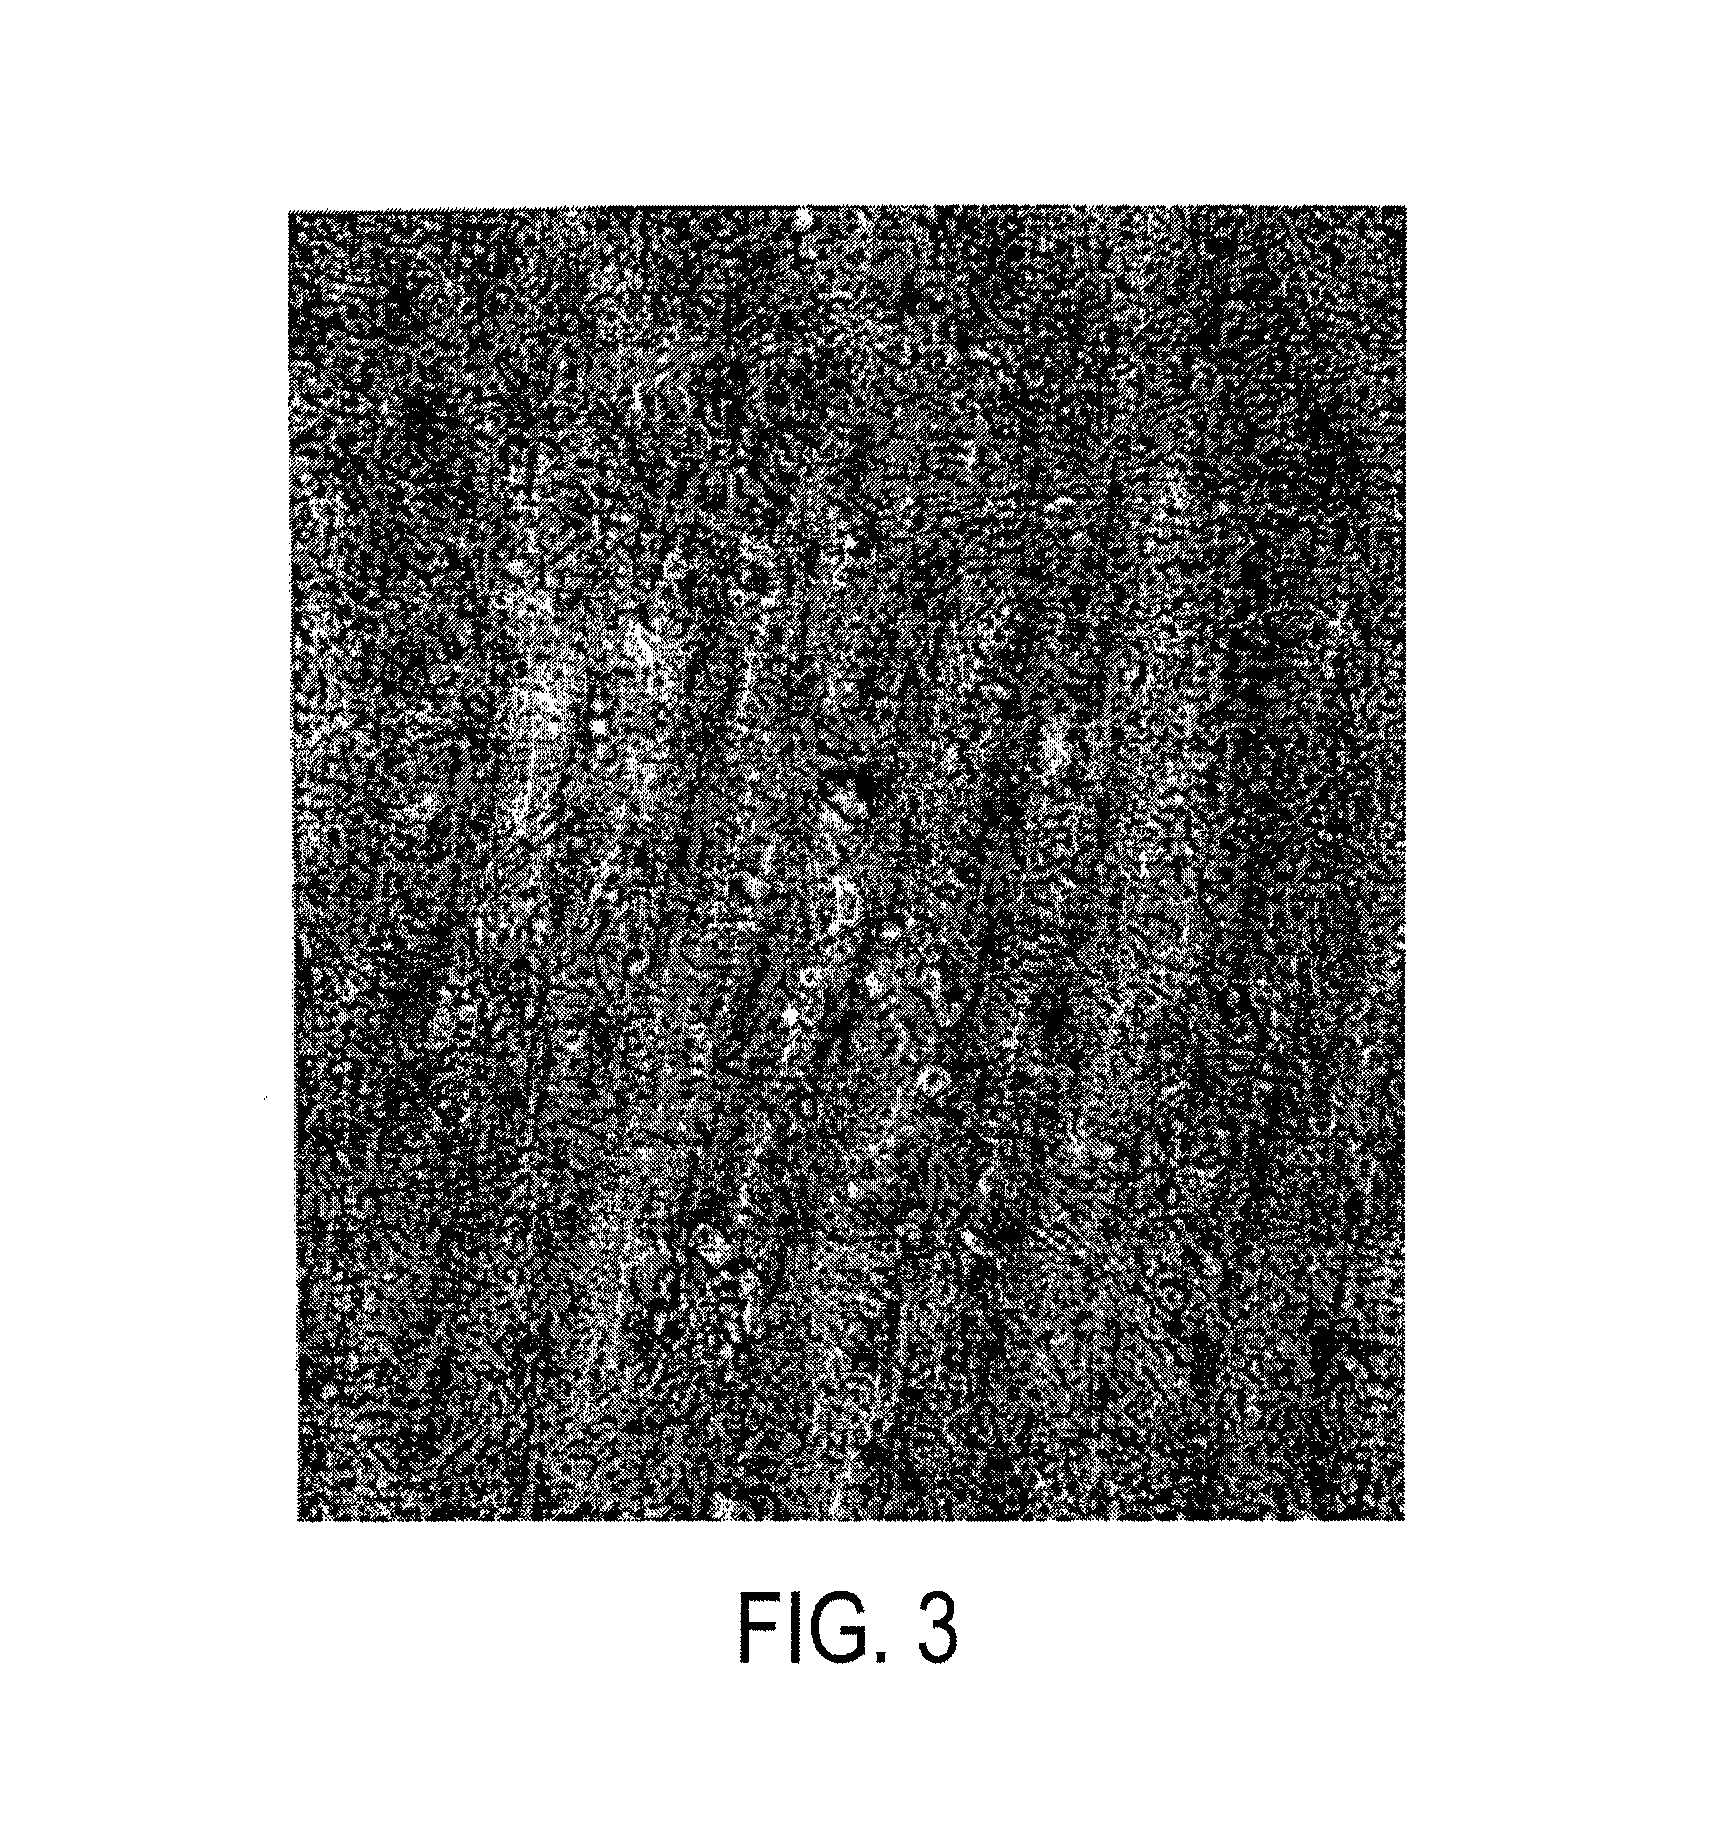 Tissue vaccines and uses thereof